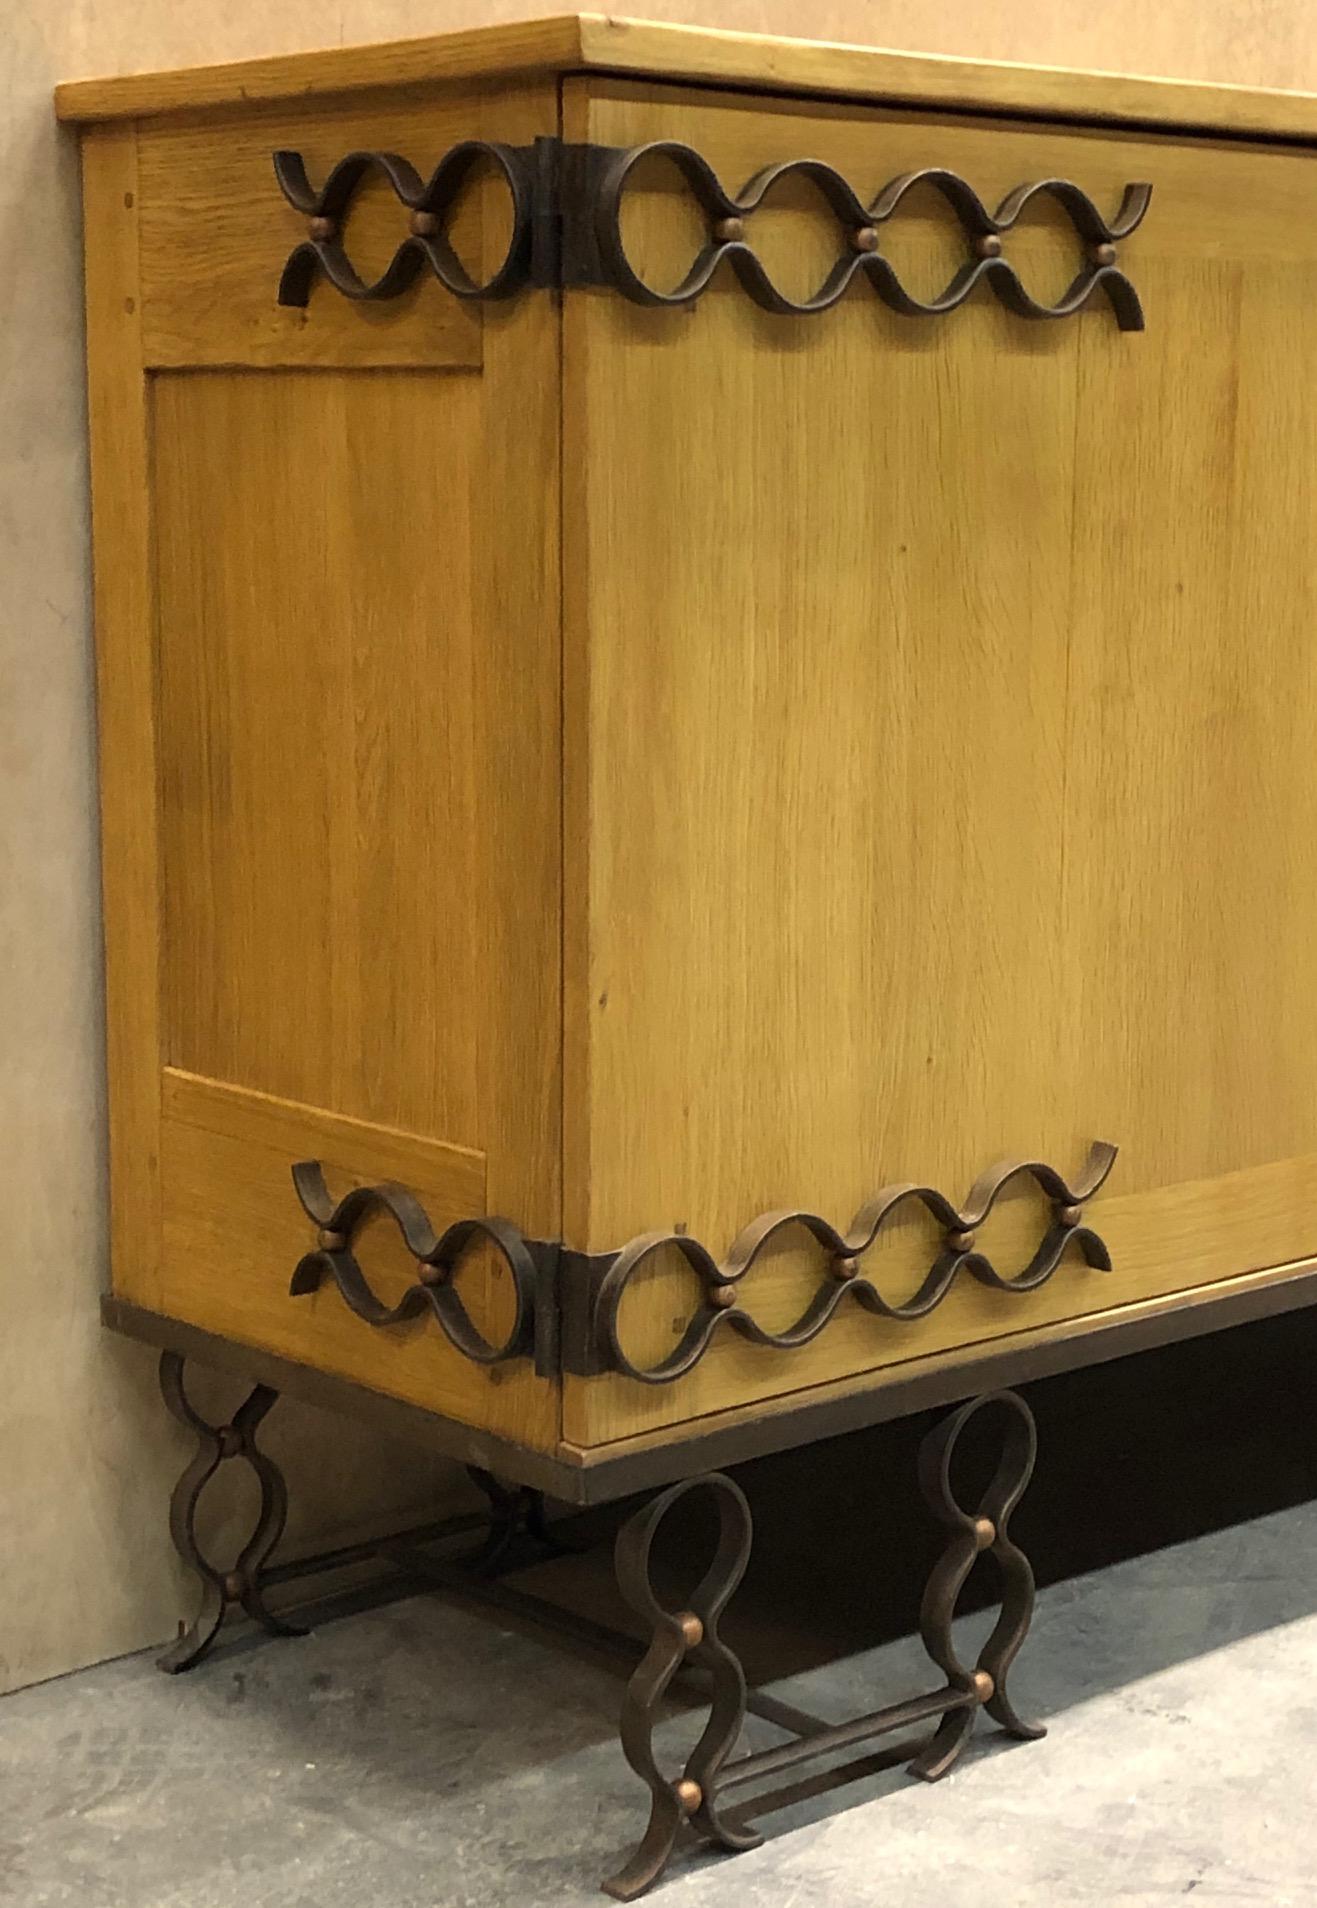 Rare oak buffet by Jean Royère. Cast iron make up the piece's legs and decorative accents in an elaborate wave-like pattern. This buffet was custom designed and produced in 1943 and was later on archived at the Musee des Arts Decoratifs in